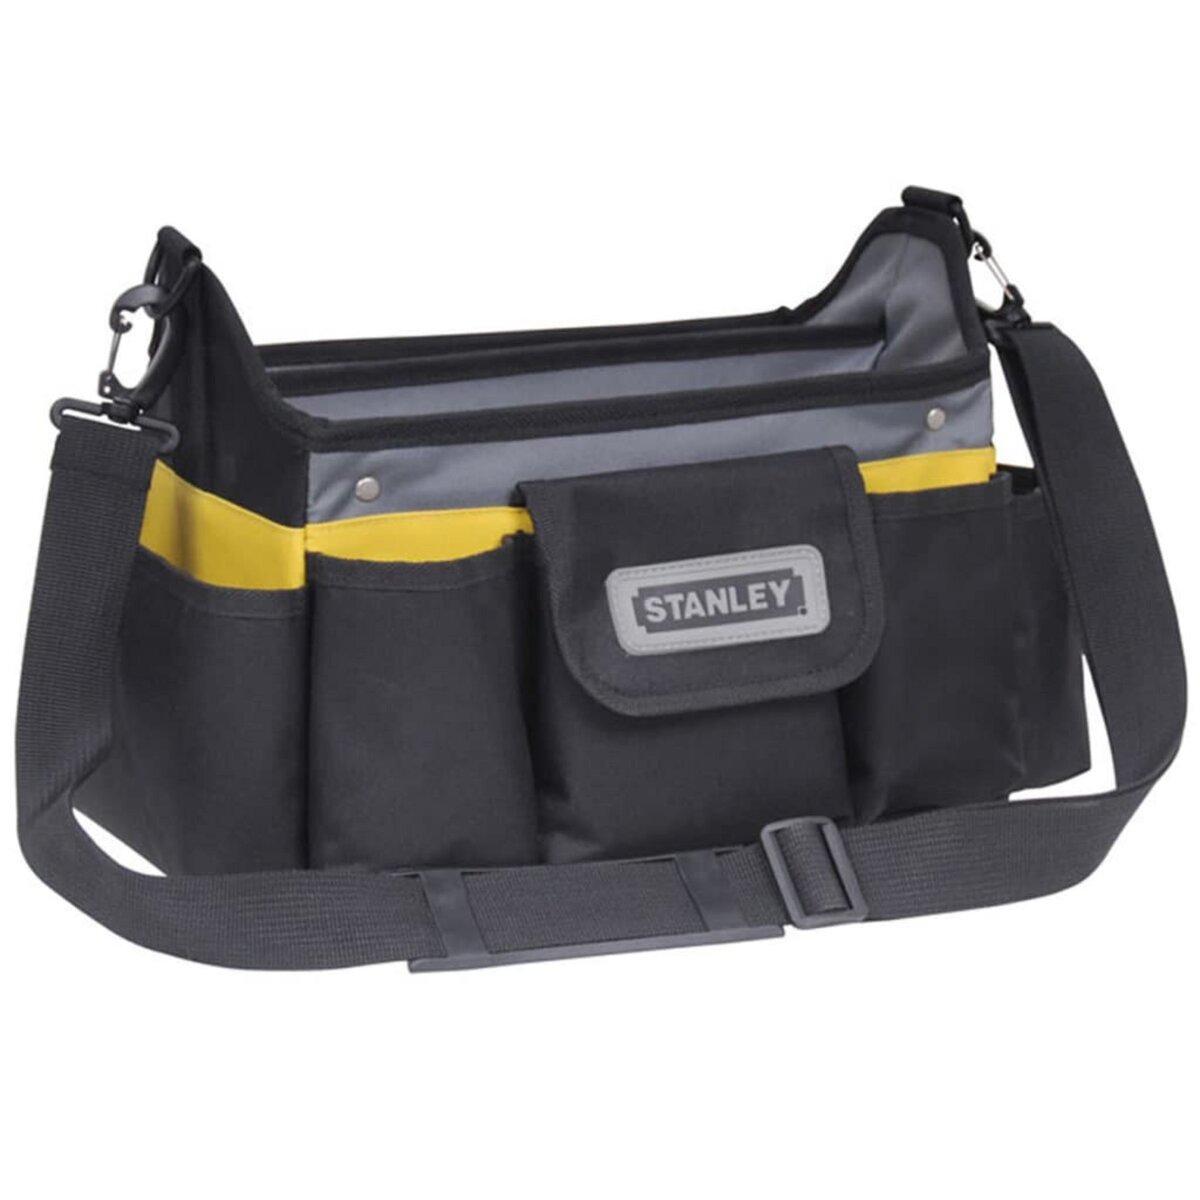 Stanley Stanley Sac a outils 31 x 20 x 26 cm STST1-70718 pas cher 